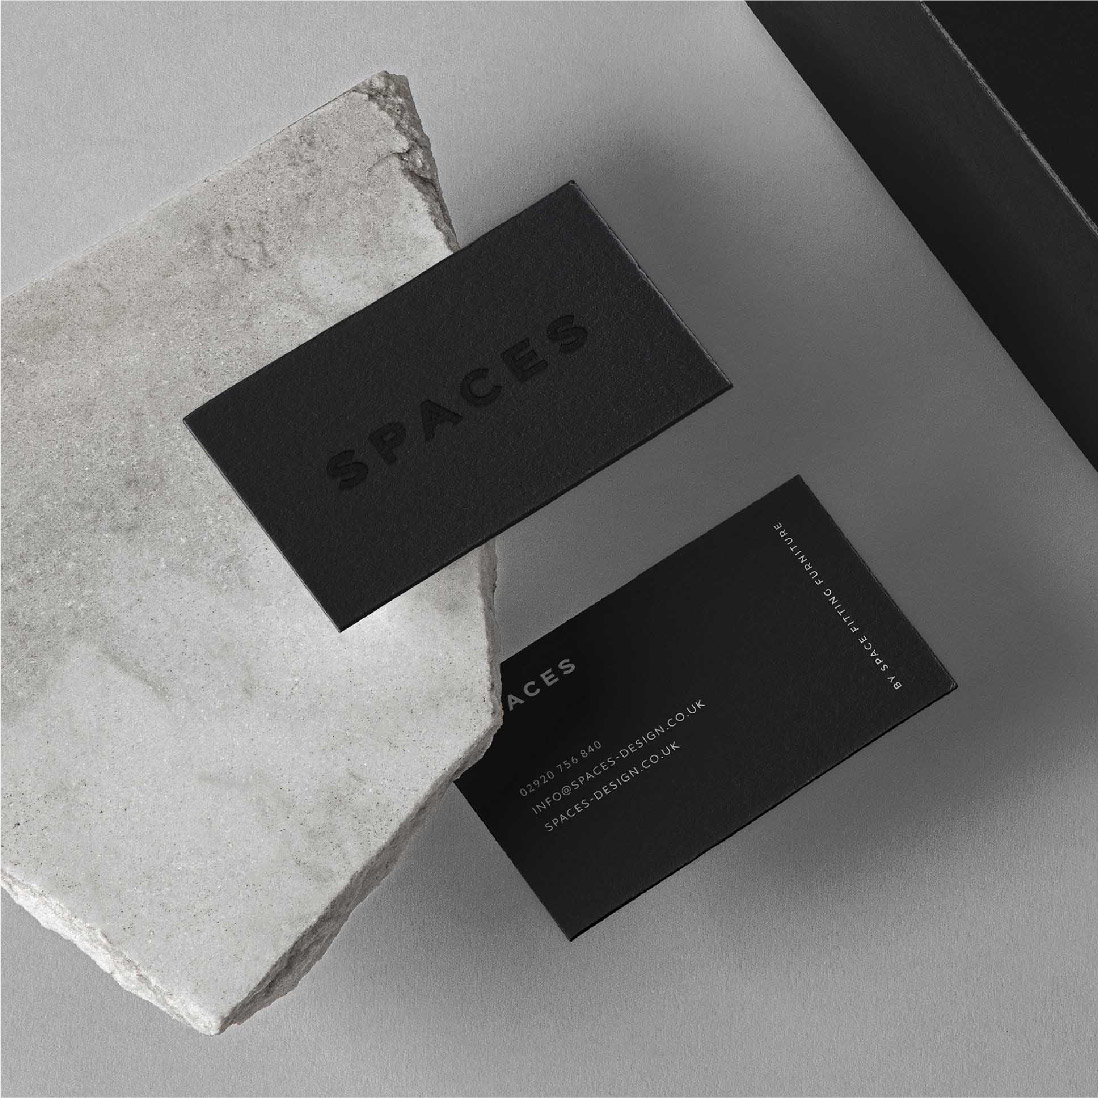 Two elegant black business cards with white text, one on a textured stone and the other partially obscured by it, placed on a smooth gray surface for a Brand Agency UK.